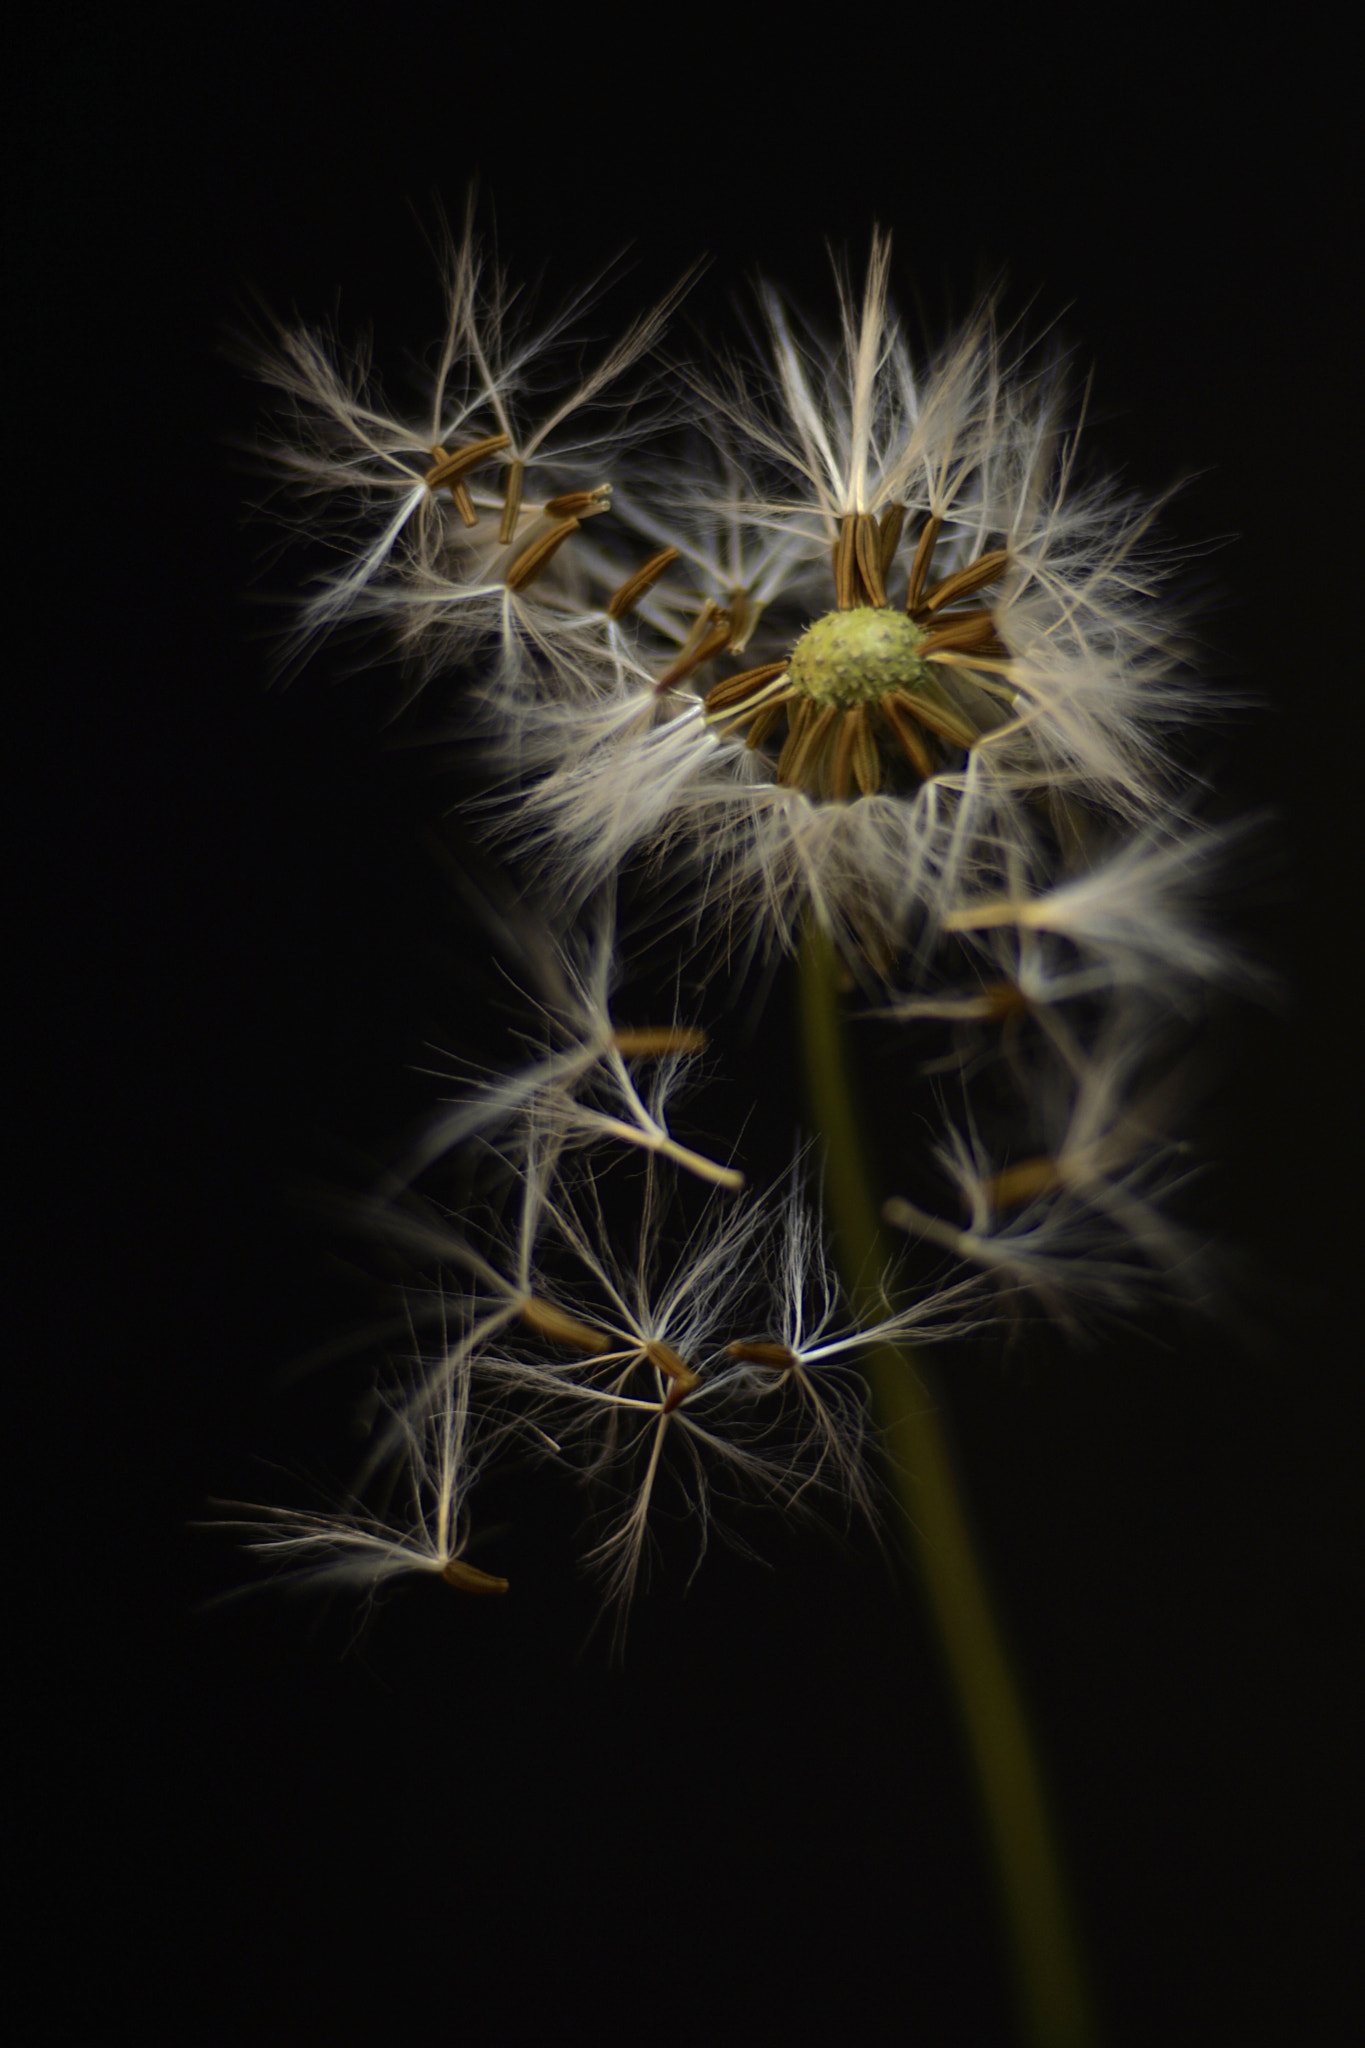 Sony a6000 + Tamron SP AF 90mm F2.8 Di Macro sample photo. A merced del viento photography